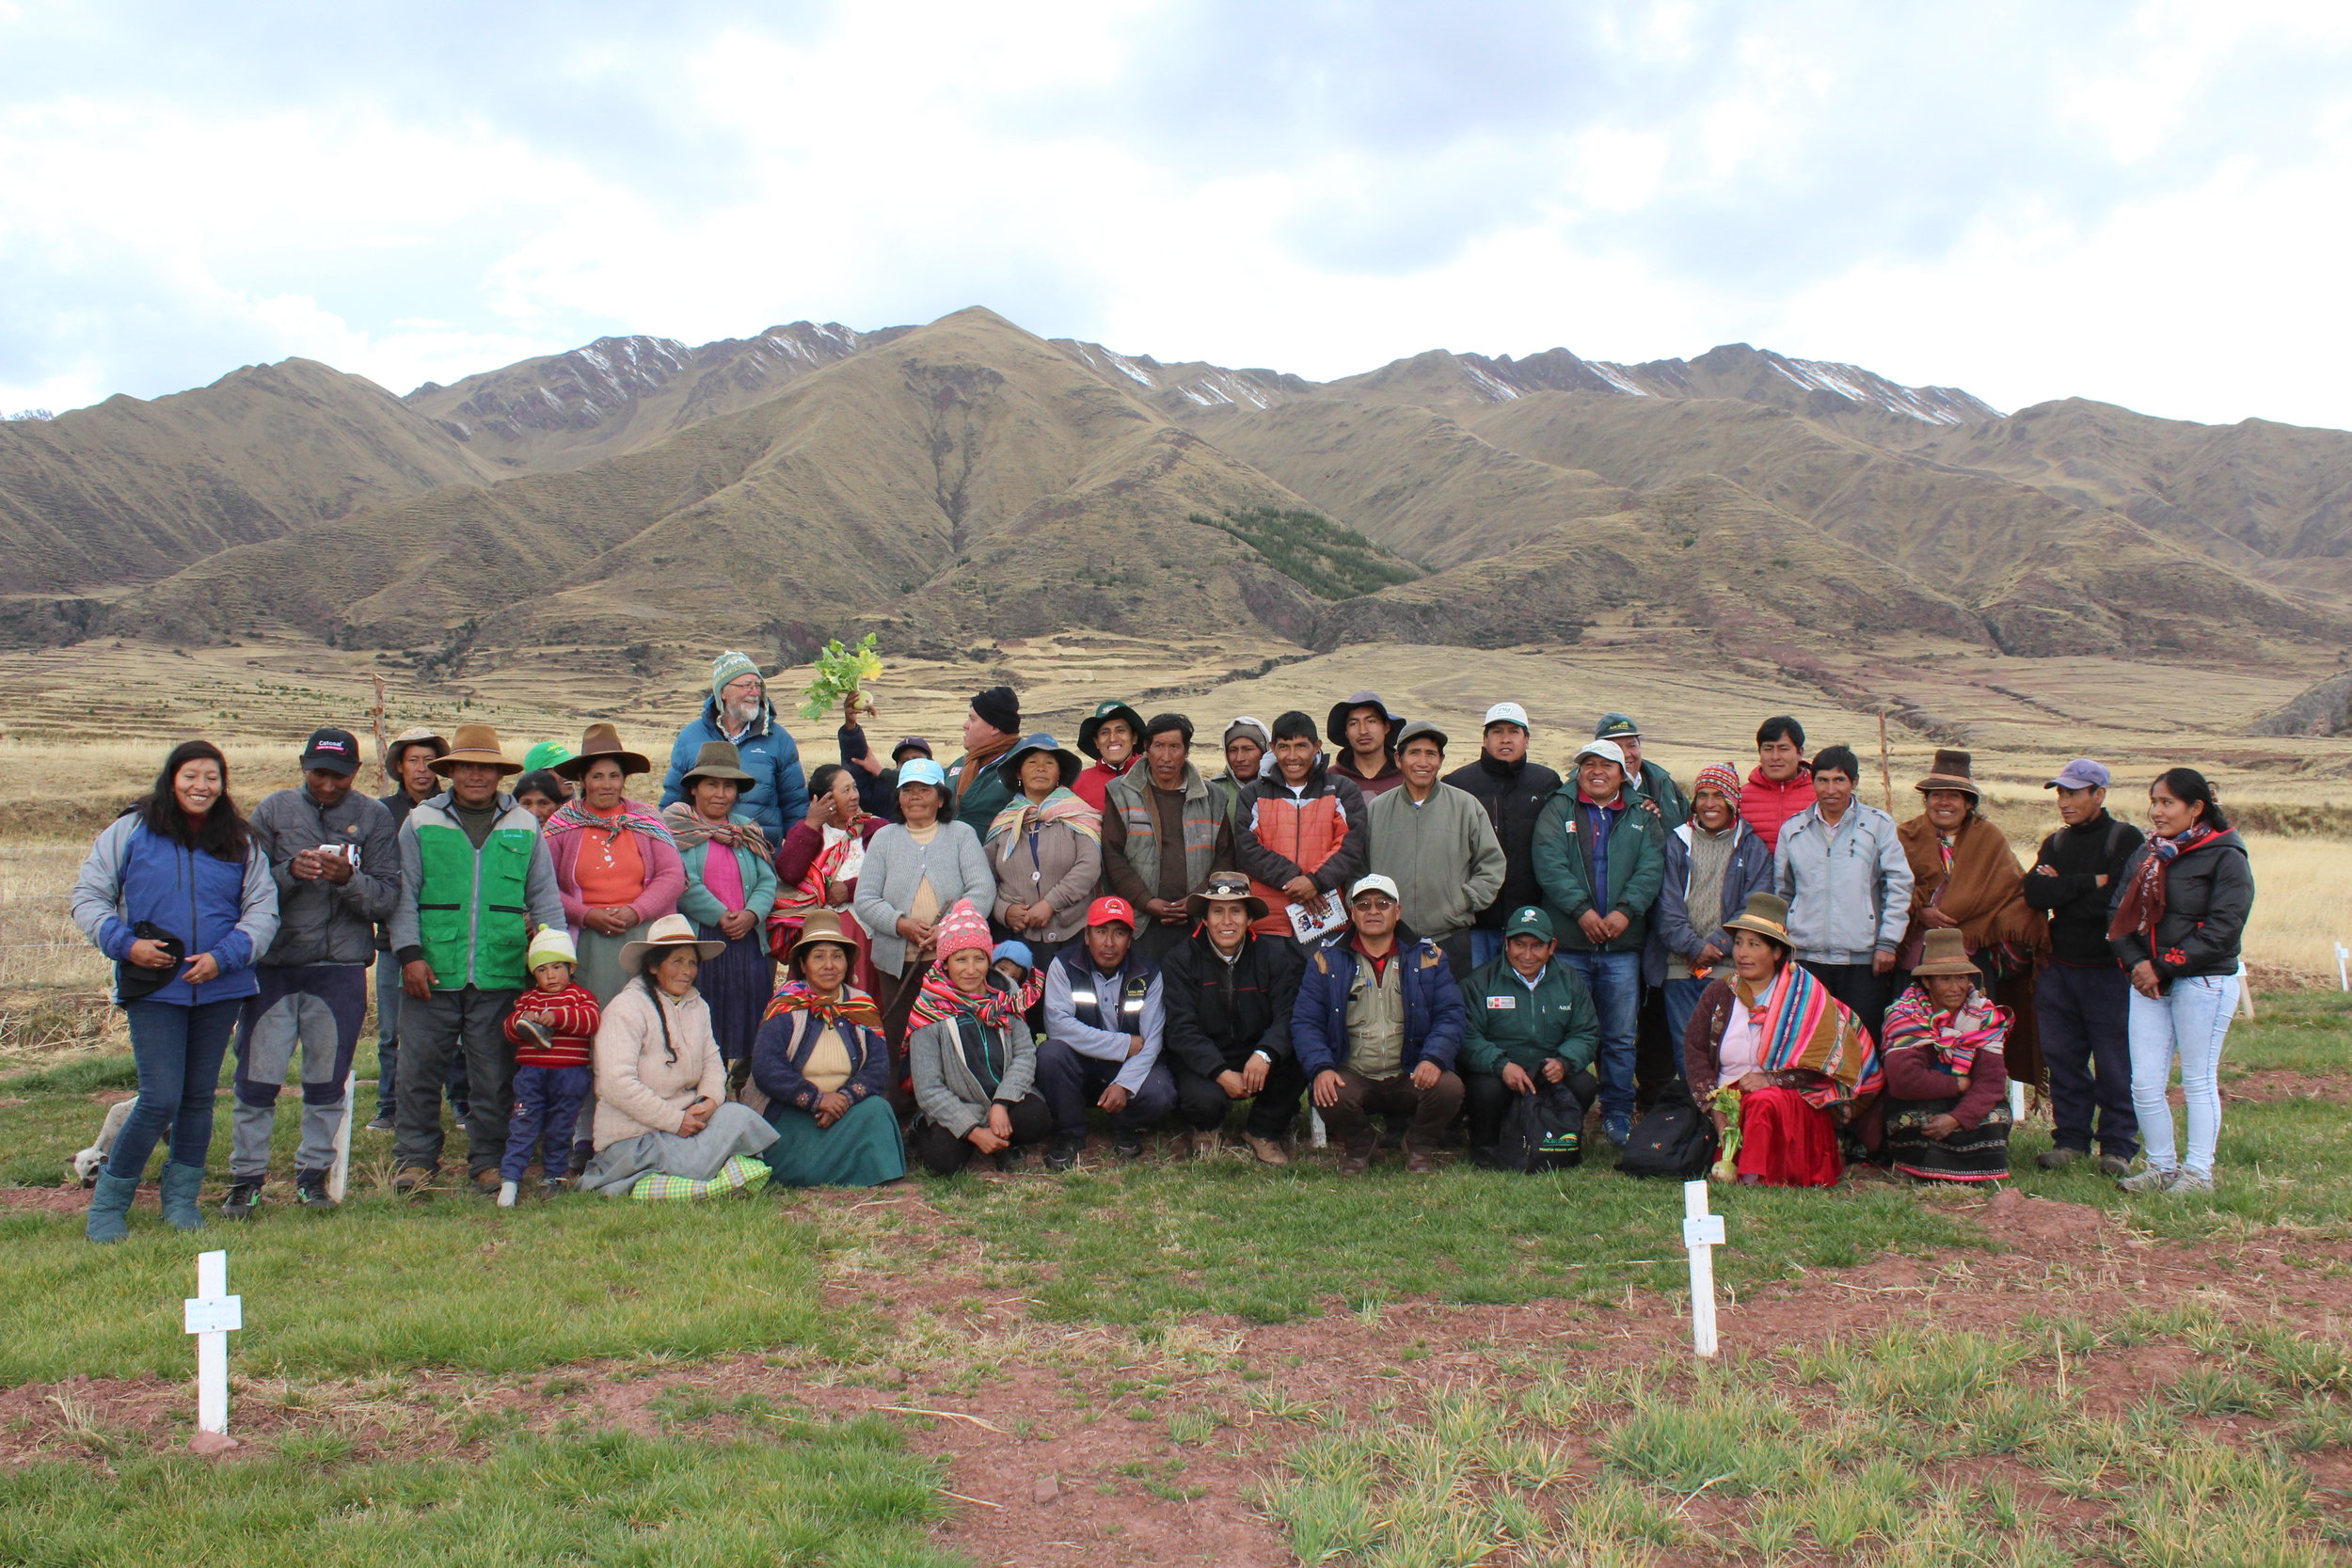 Phil Rolston, after evaluation of introduction of new forage varieties and species in Sangarara, Cusco